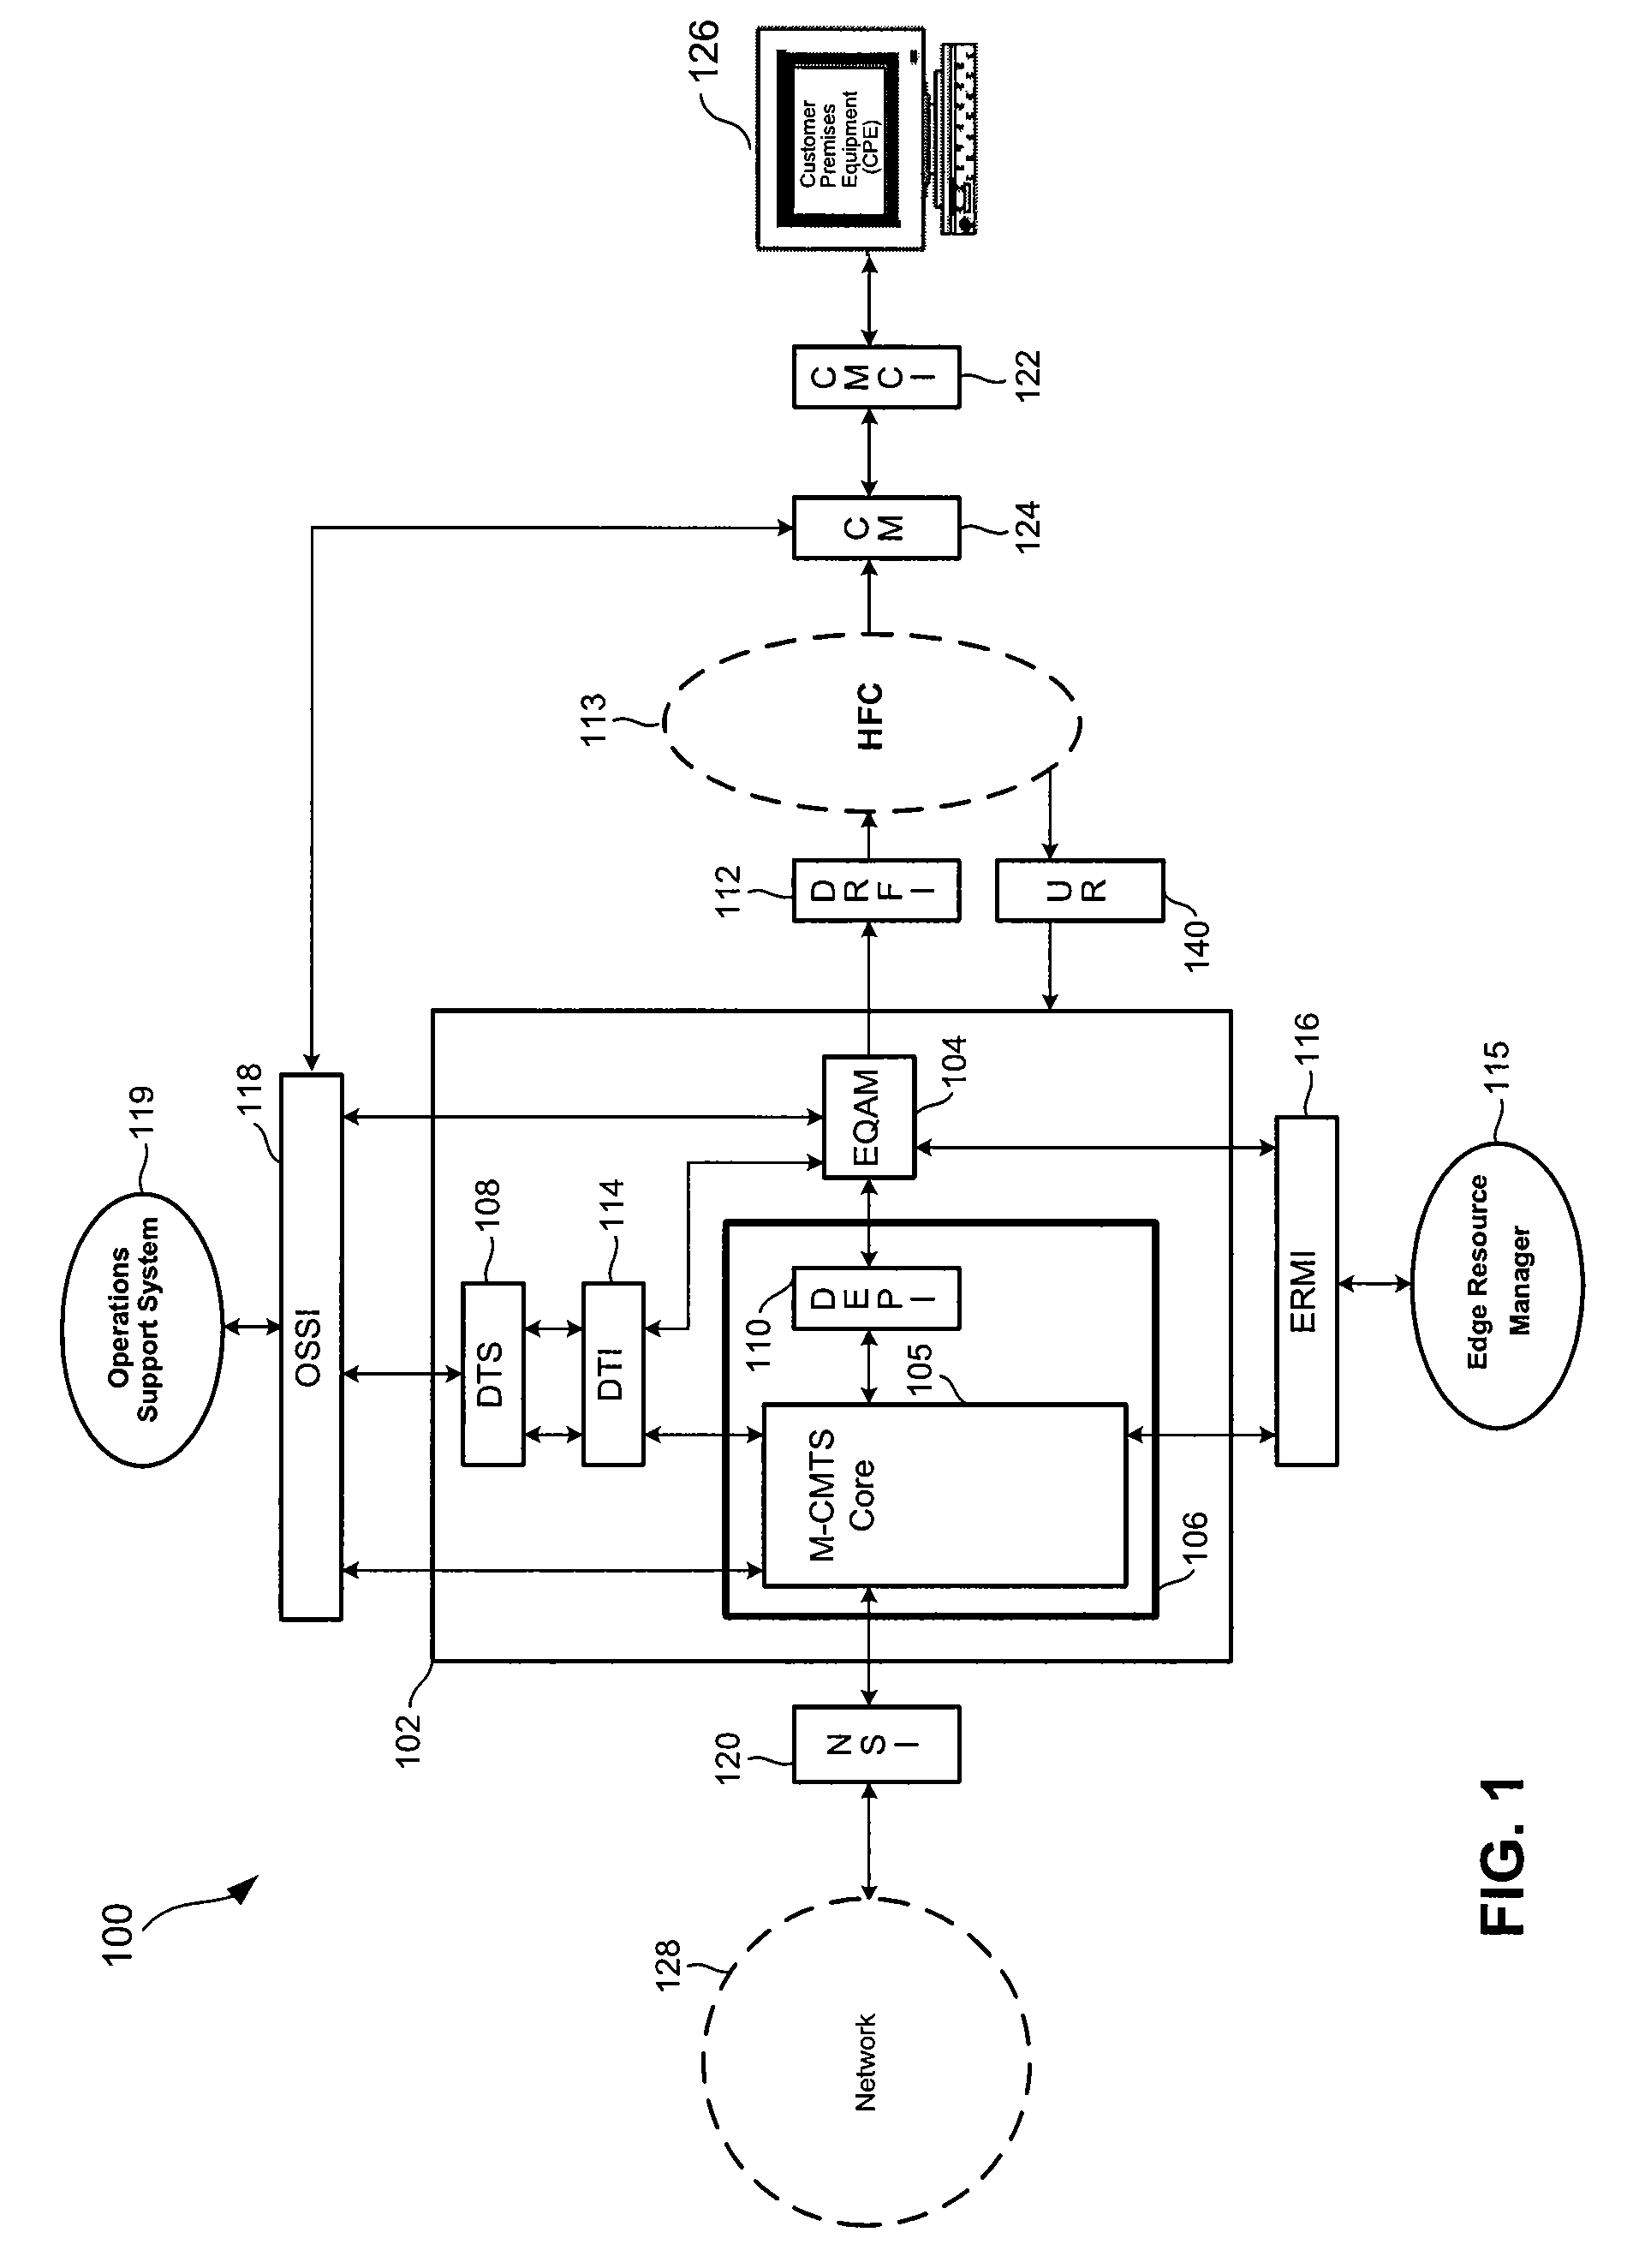 Dynamic Header Creation and Flow Control for A Programmable Communications Processor, and Applications Thereof